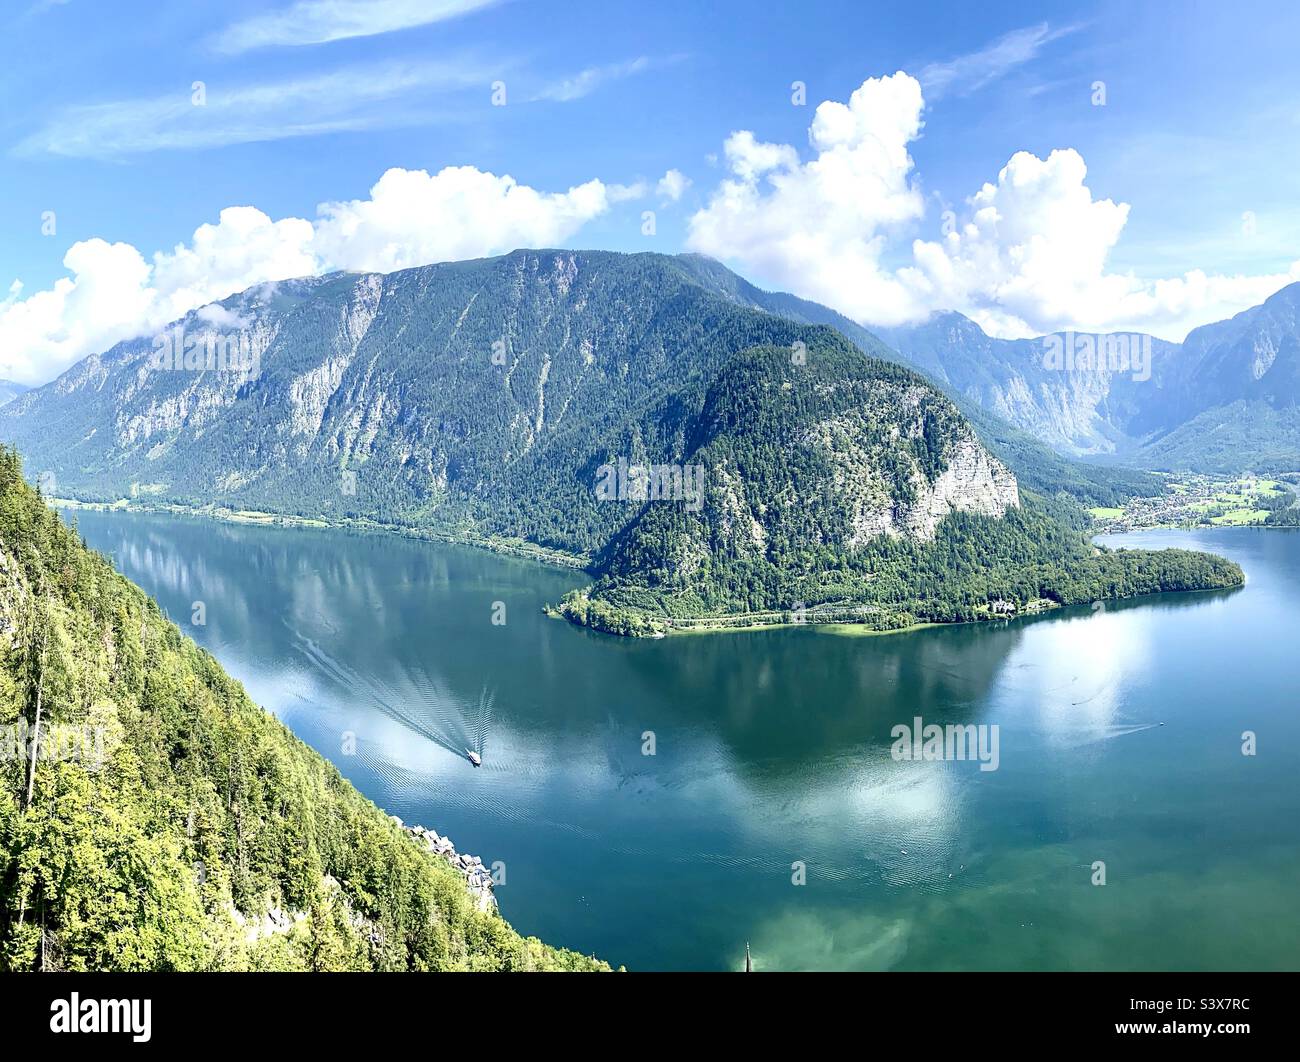 Panoramic view of the stunning scenery near the town of Hallstatt in the Austrian Lakes region Stock Photo